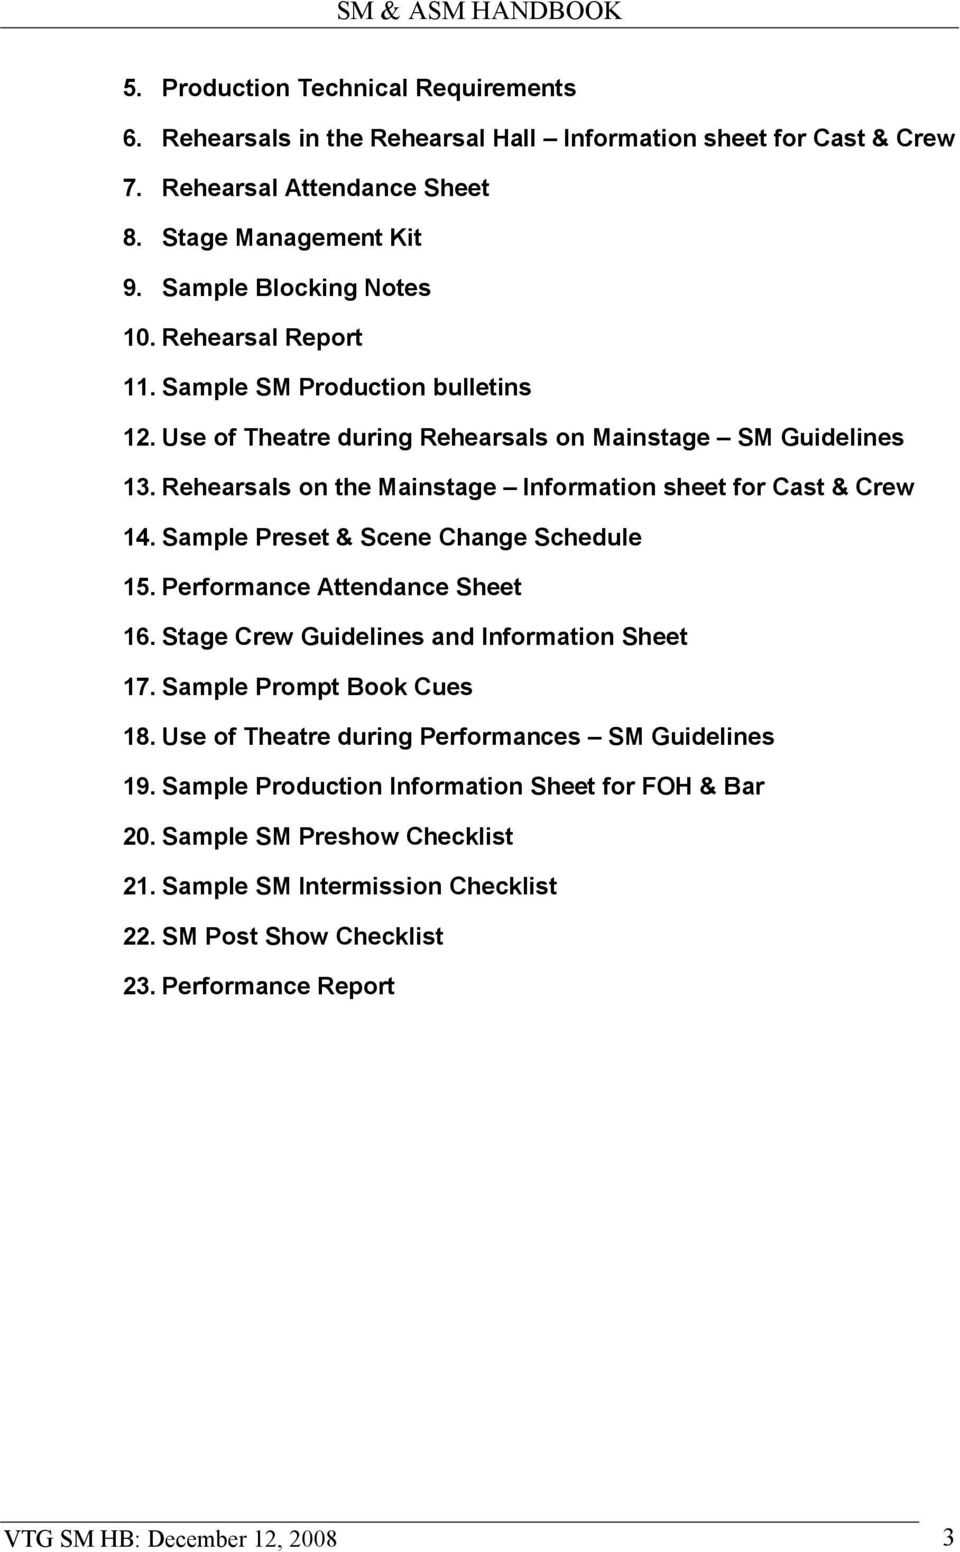 Stage Manager & Assistant Stage Manager Handbook – Pdf Free With Regard To Rehearsal Report Template